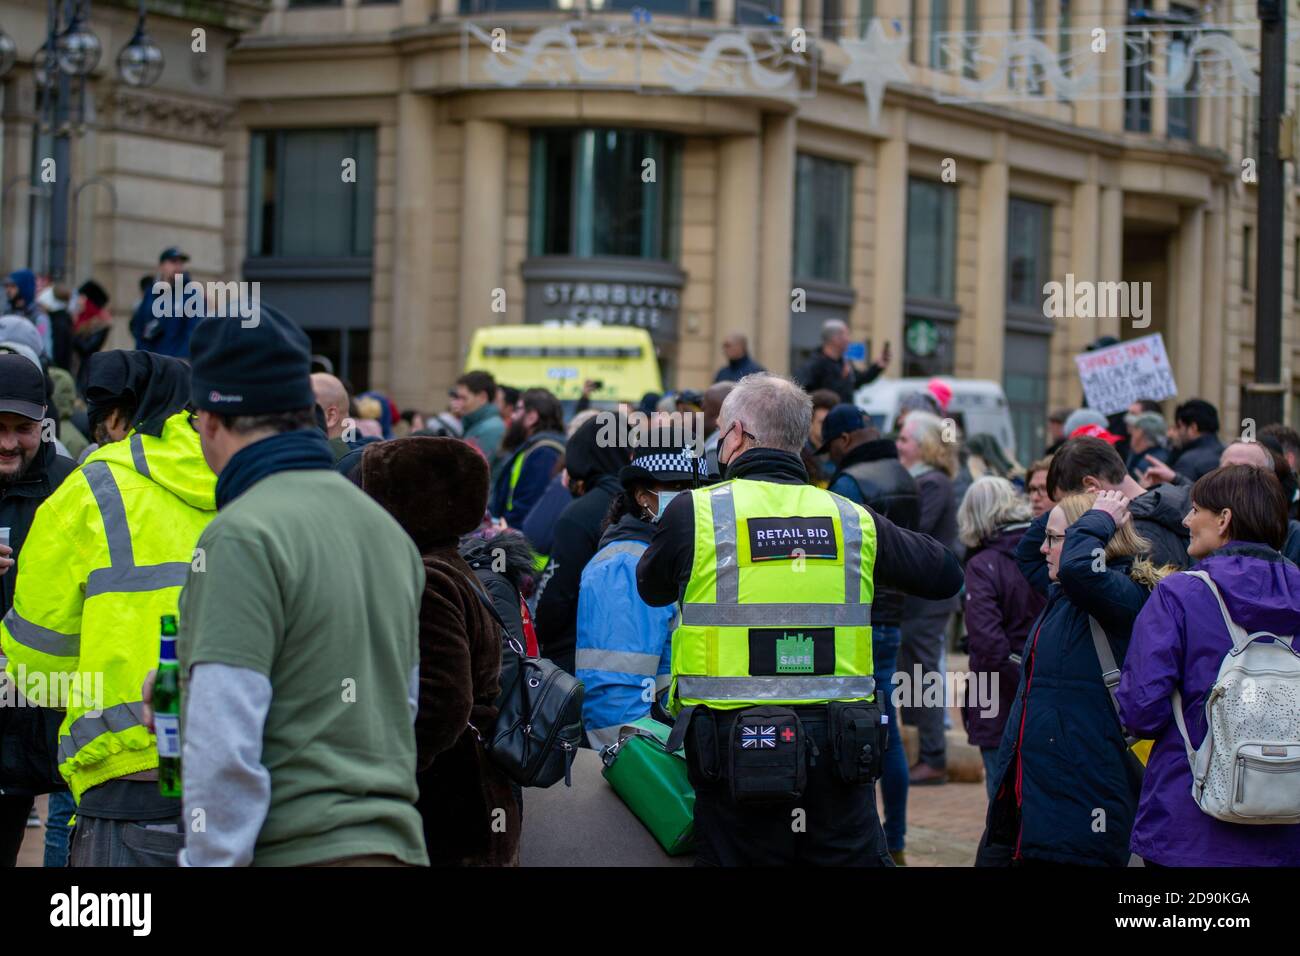 Retail BID officer amongst a crowd of anti-lockdown protester on Victoria Square, Birmingham Stock Photo